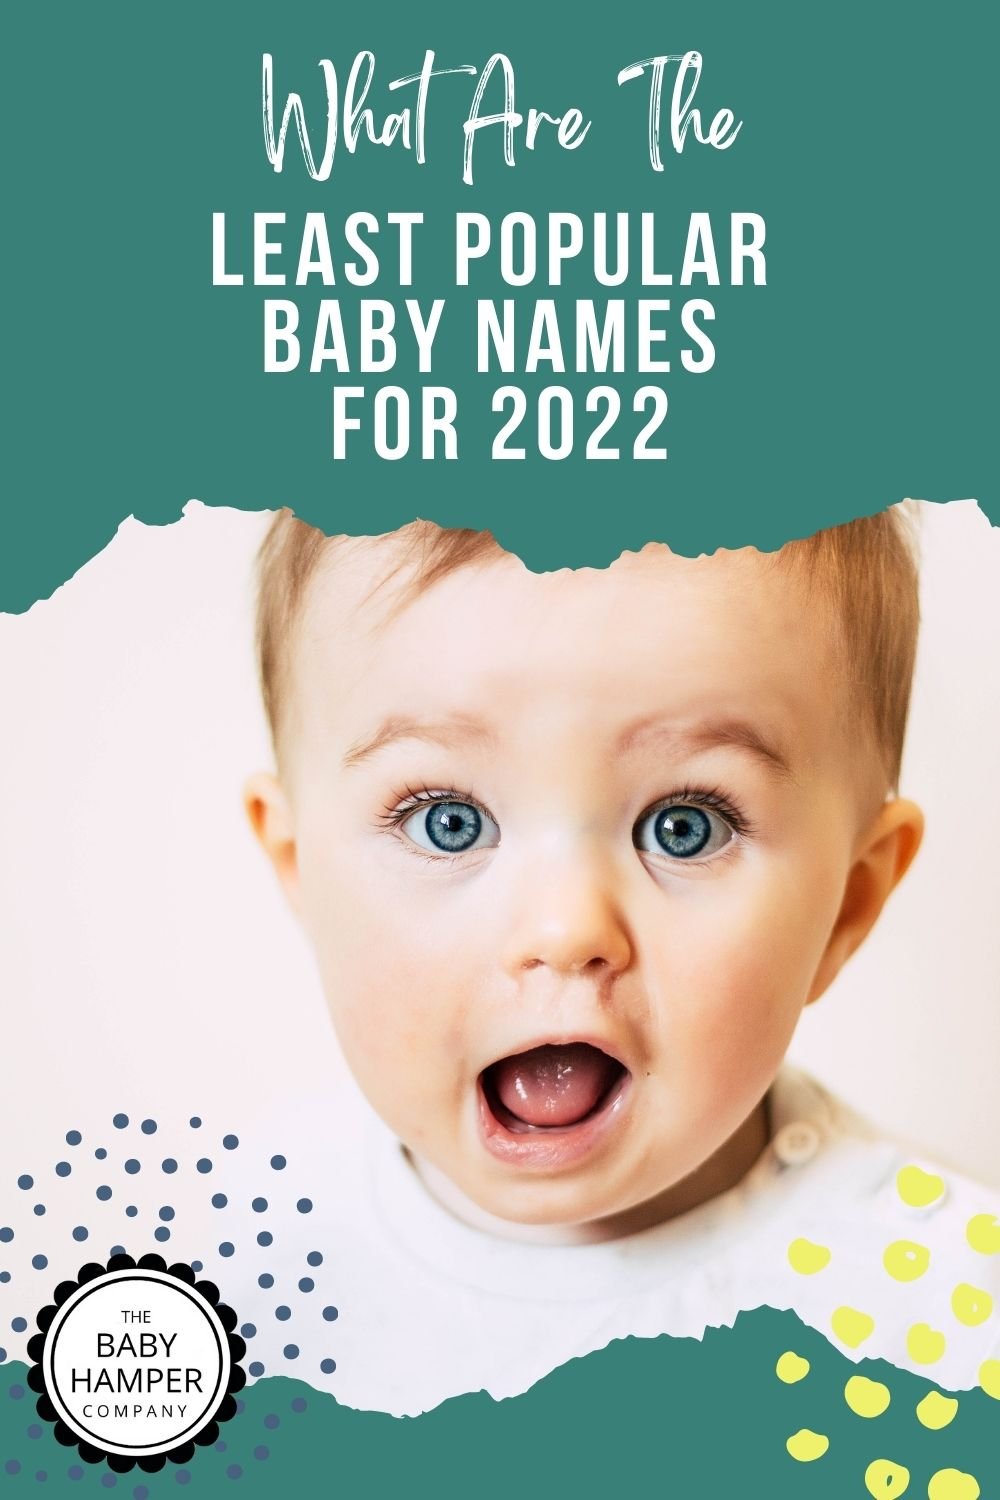 What Are The Least Popular Baby Names In The UK For 2022